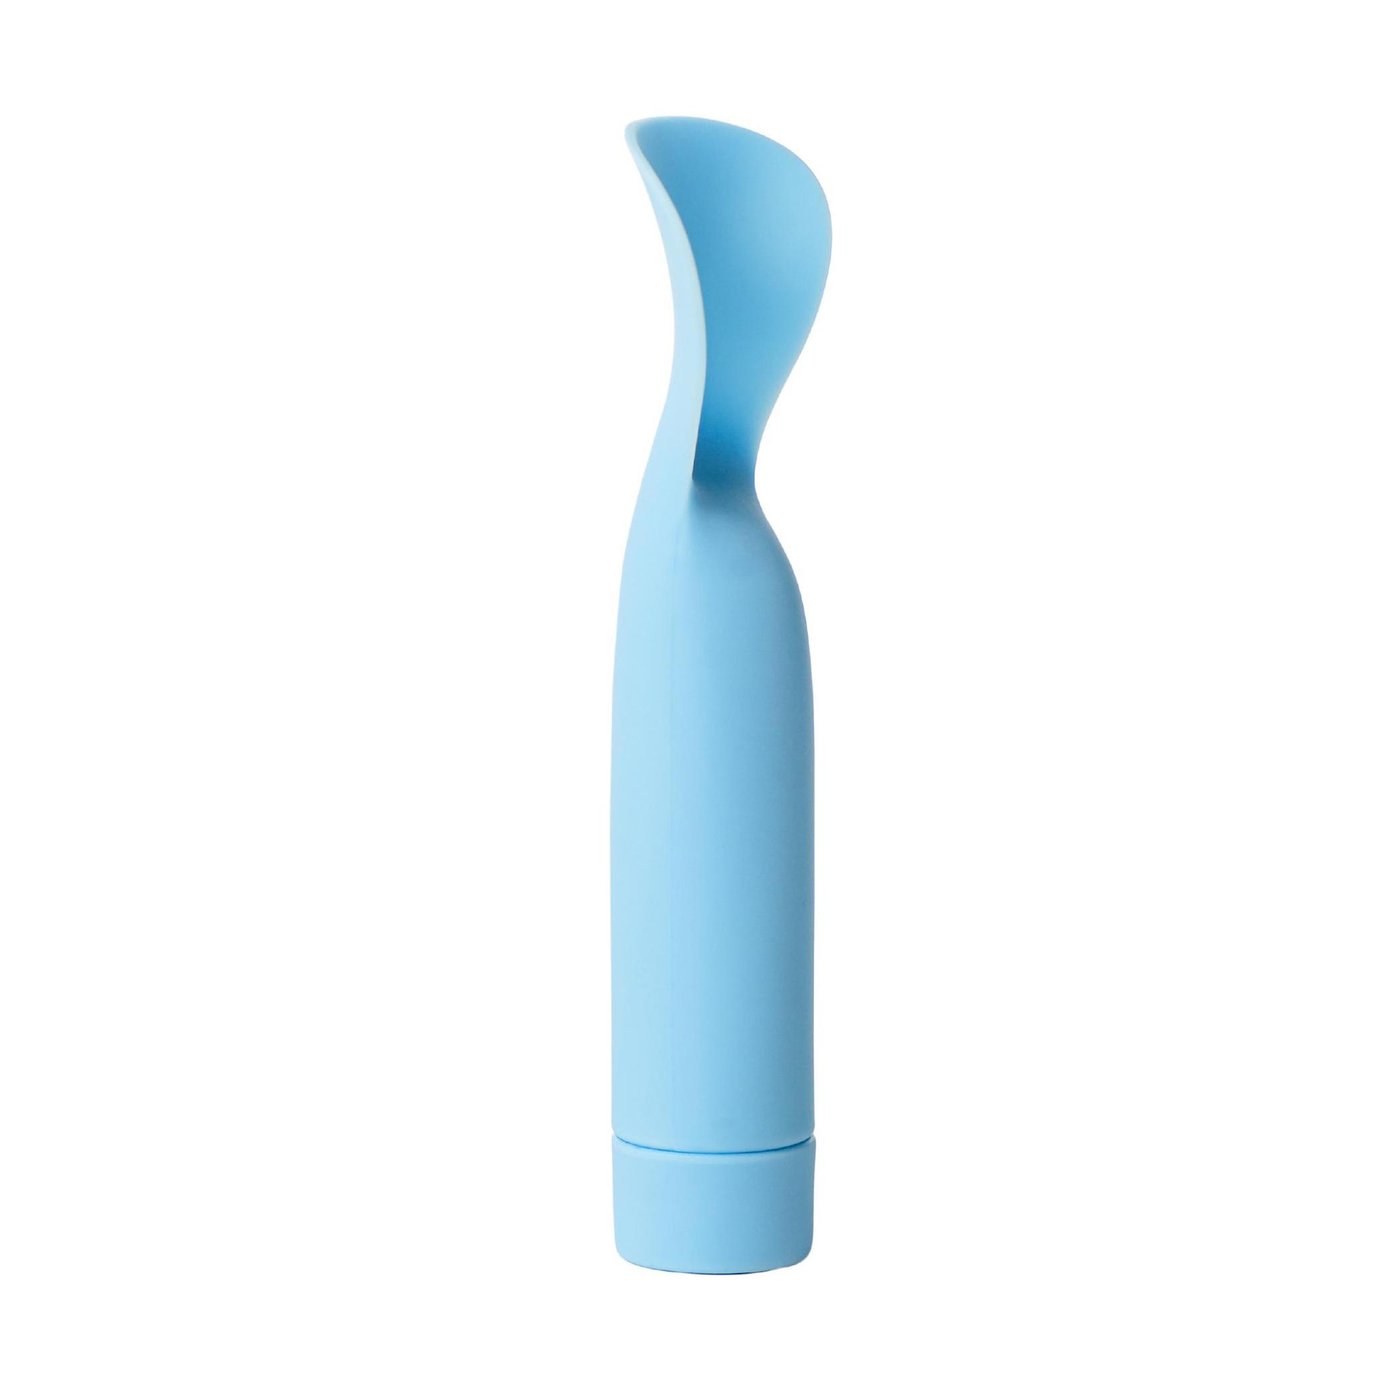 Makers Vibrator | French Lover Smile The goop